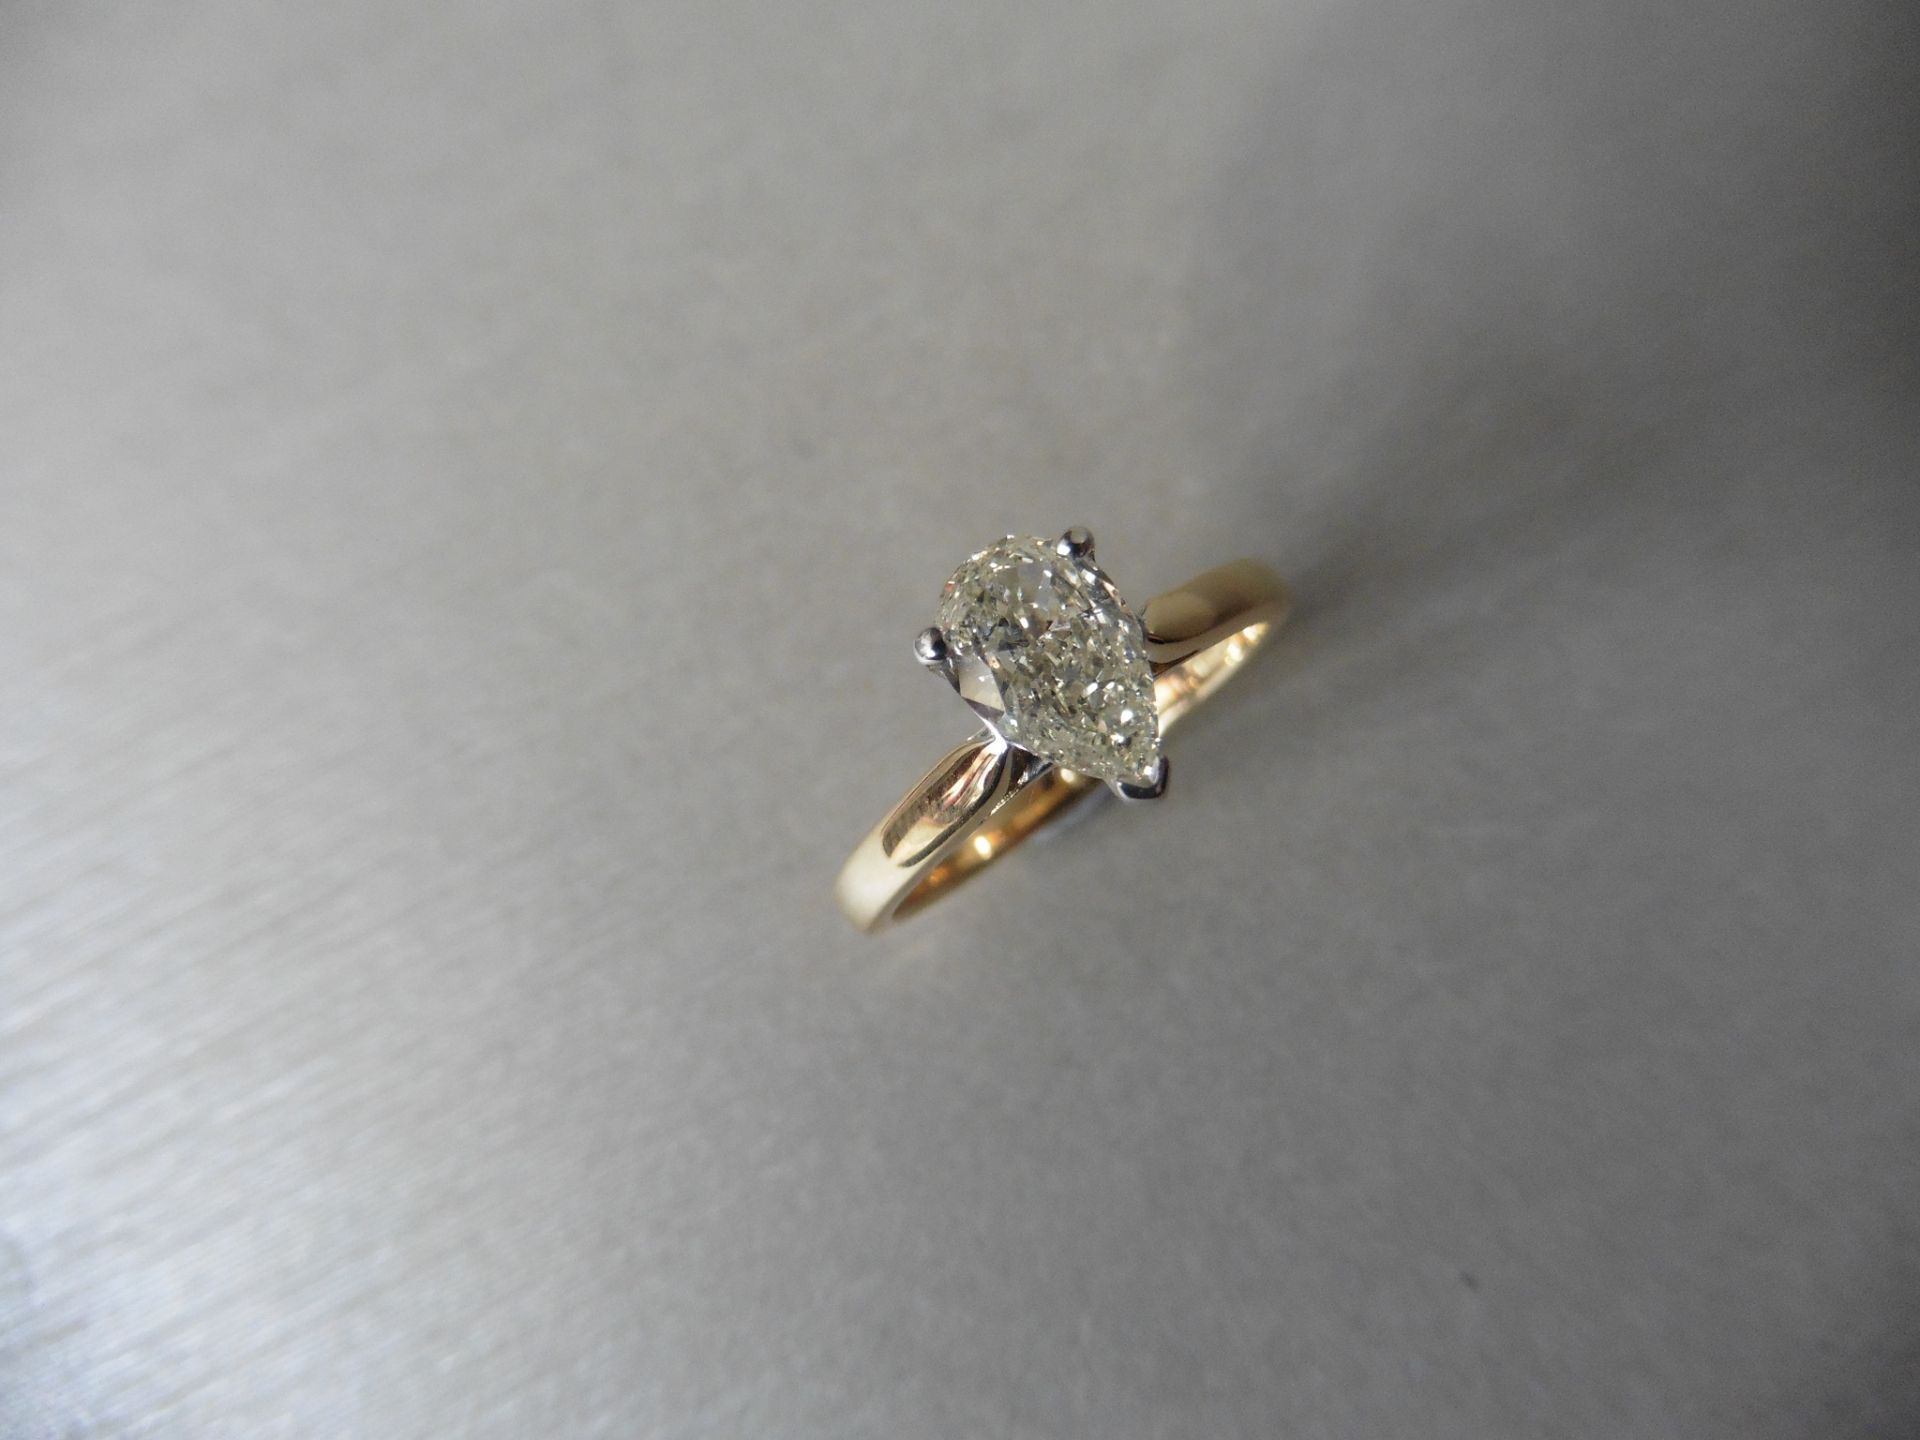 1ct pearshape Daimond,1ct pearshape j colour si2 clarity top cut,18ct yellow/white gold setting 3. - Image 2 of 4